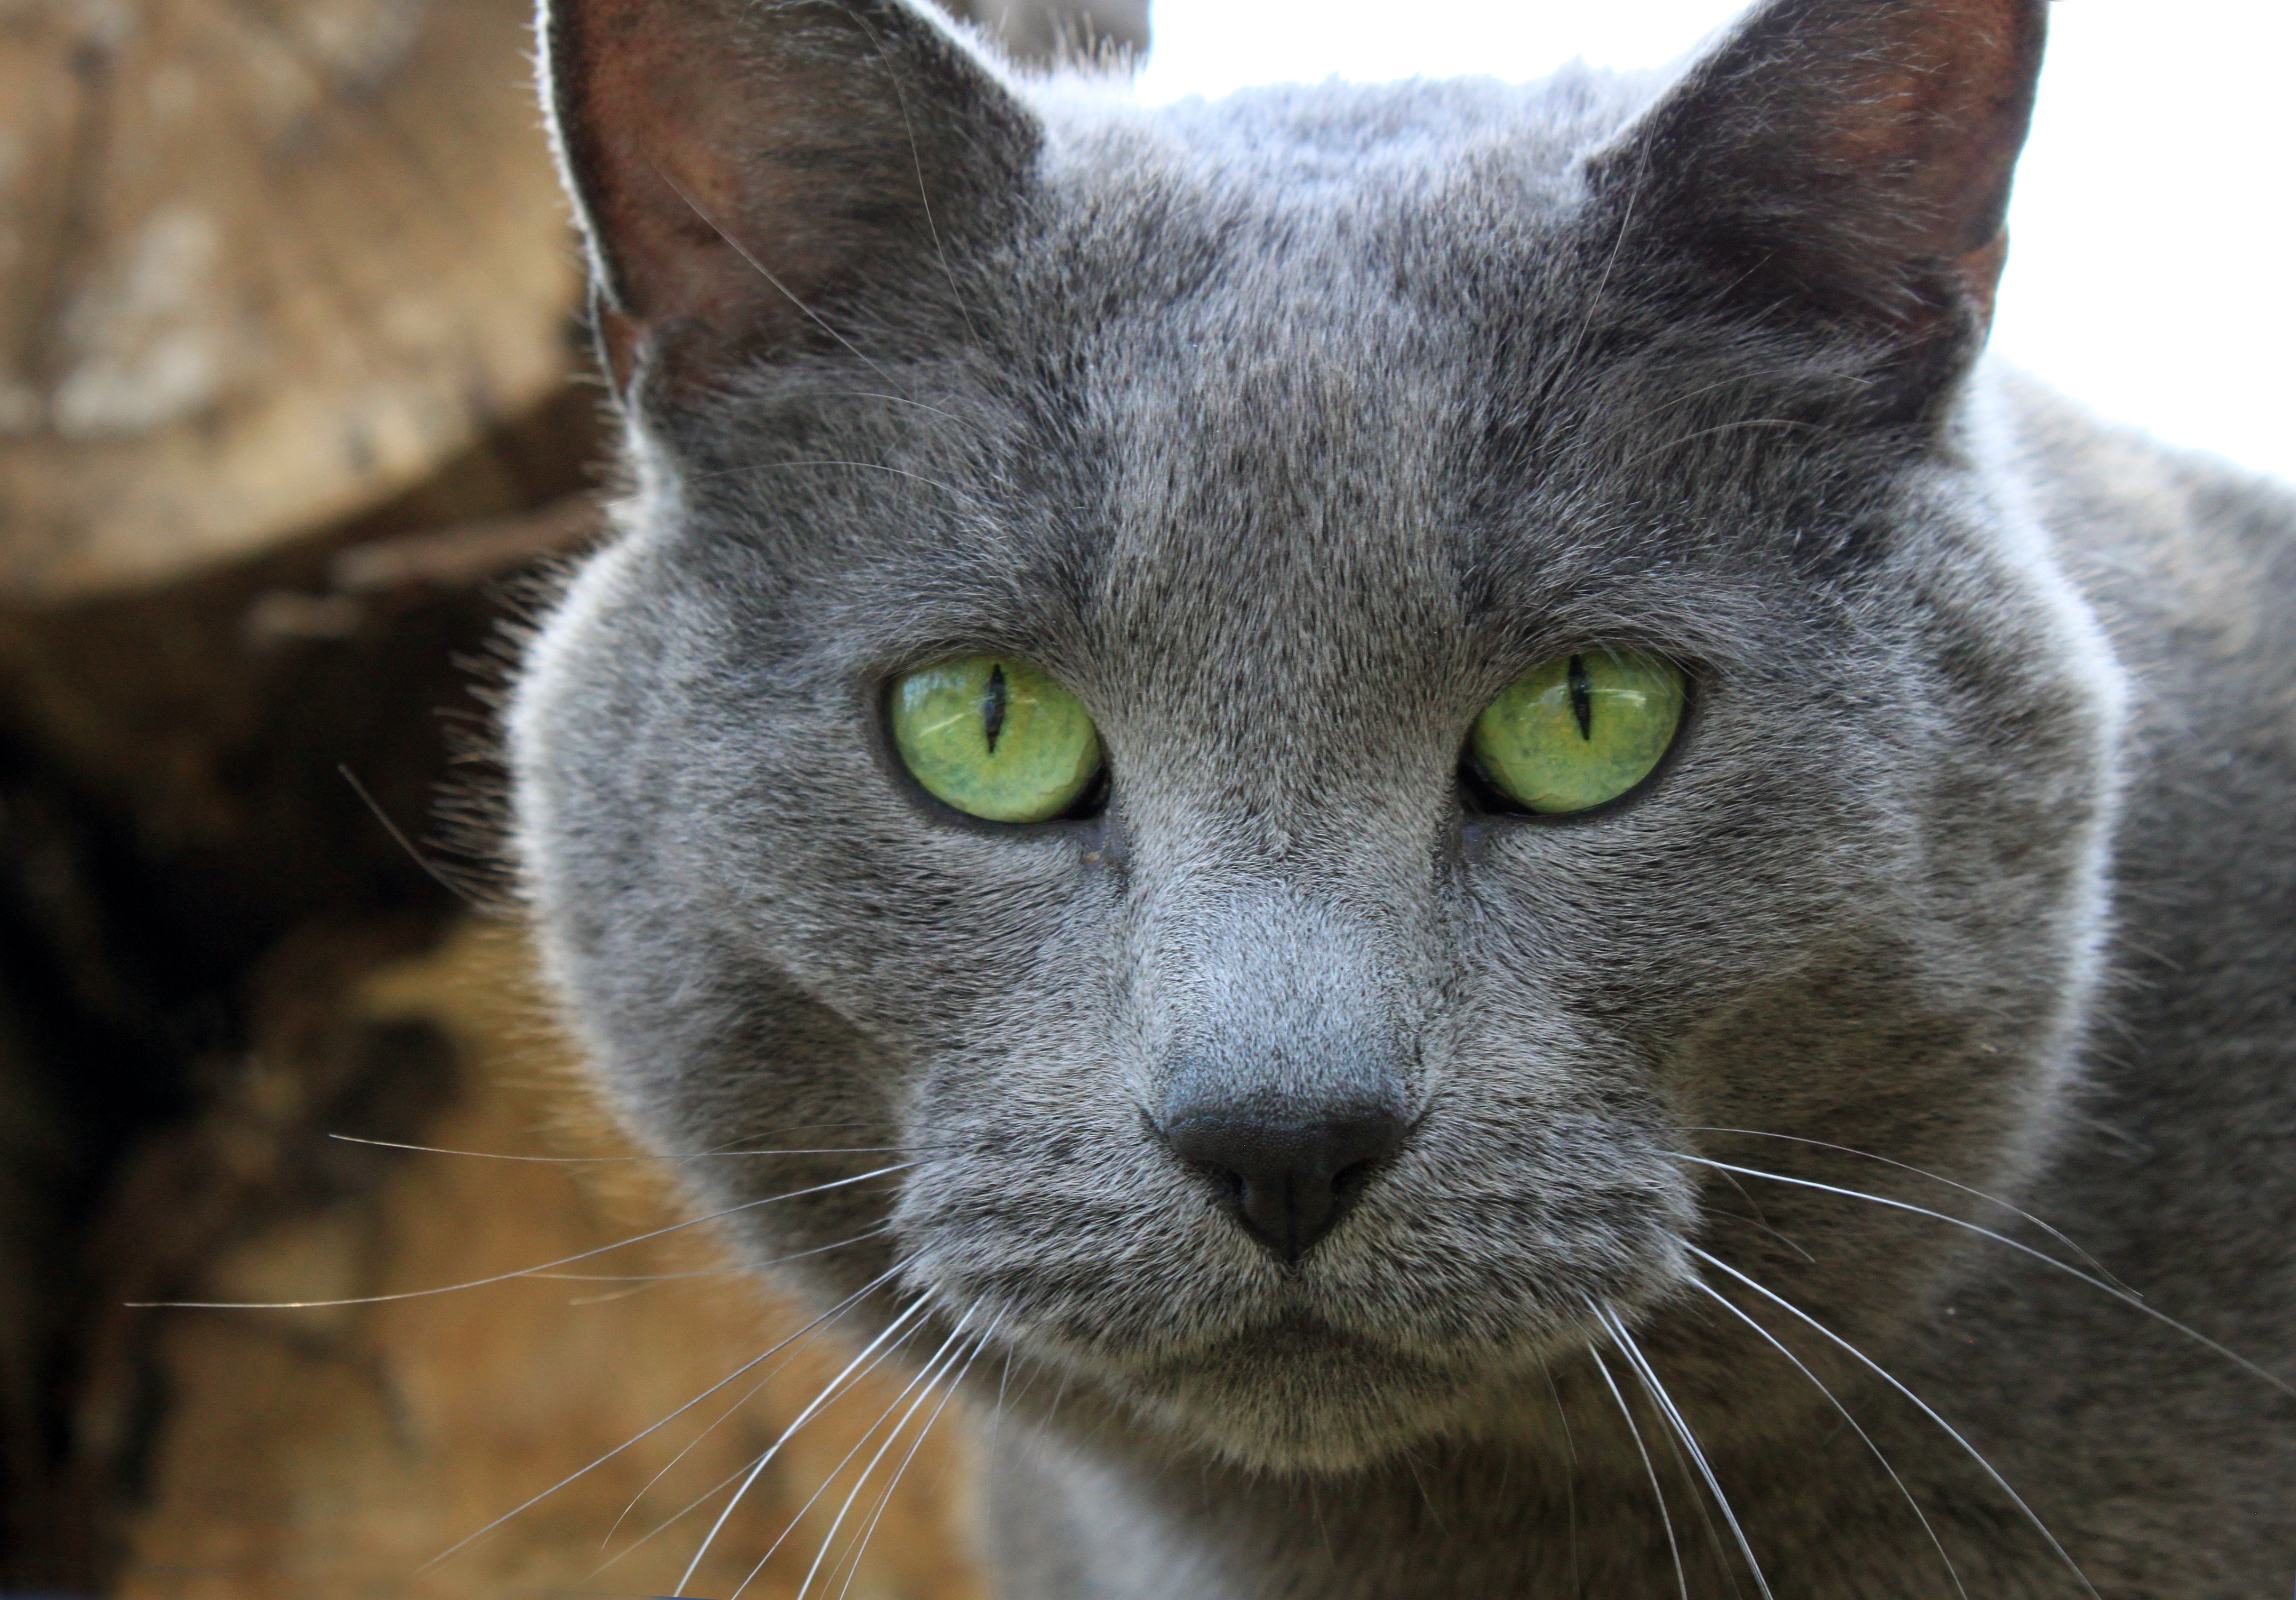 Large, Pet, Eyes, Green, Cat, Gray, Male, domestic cat, one animal